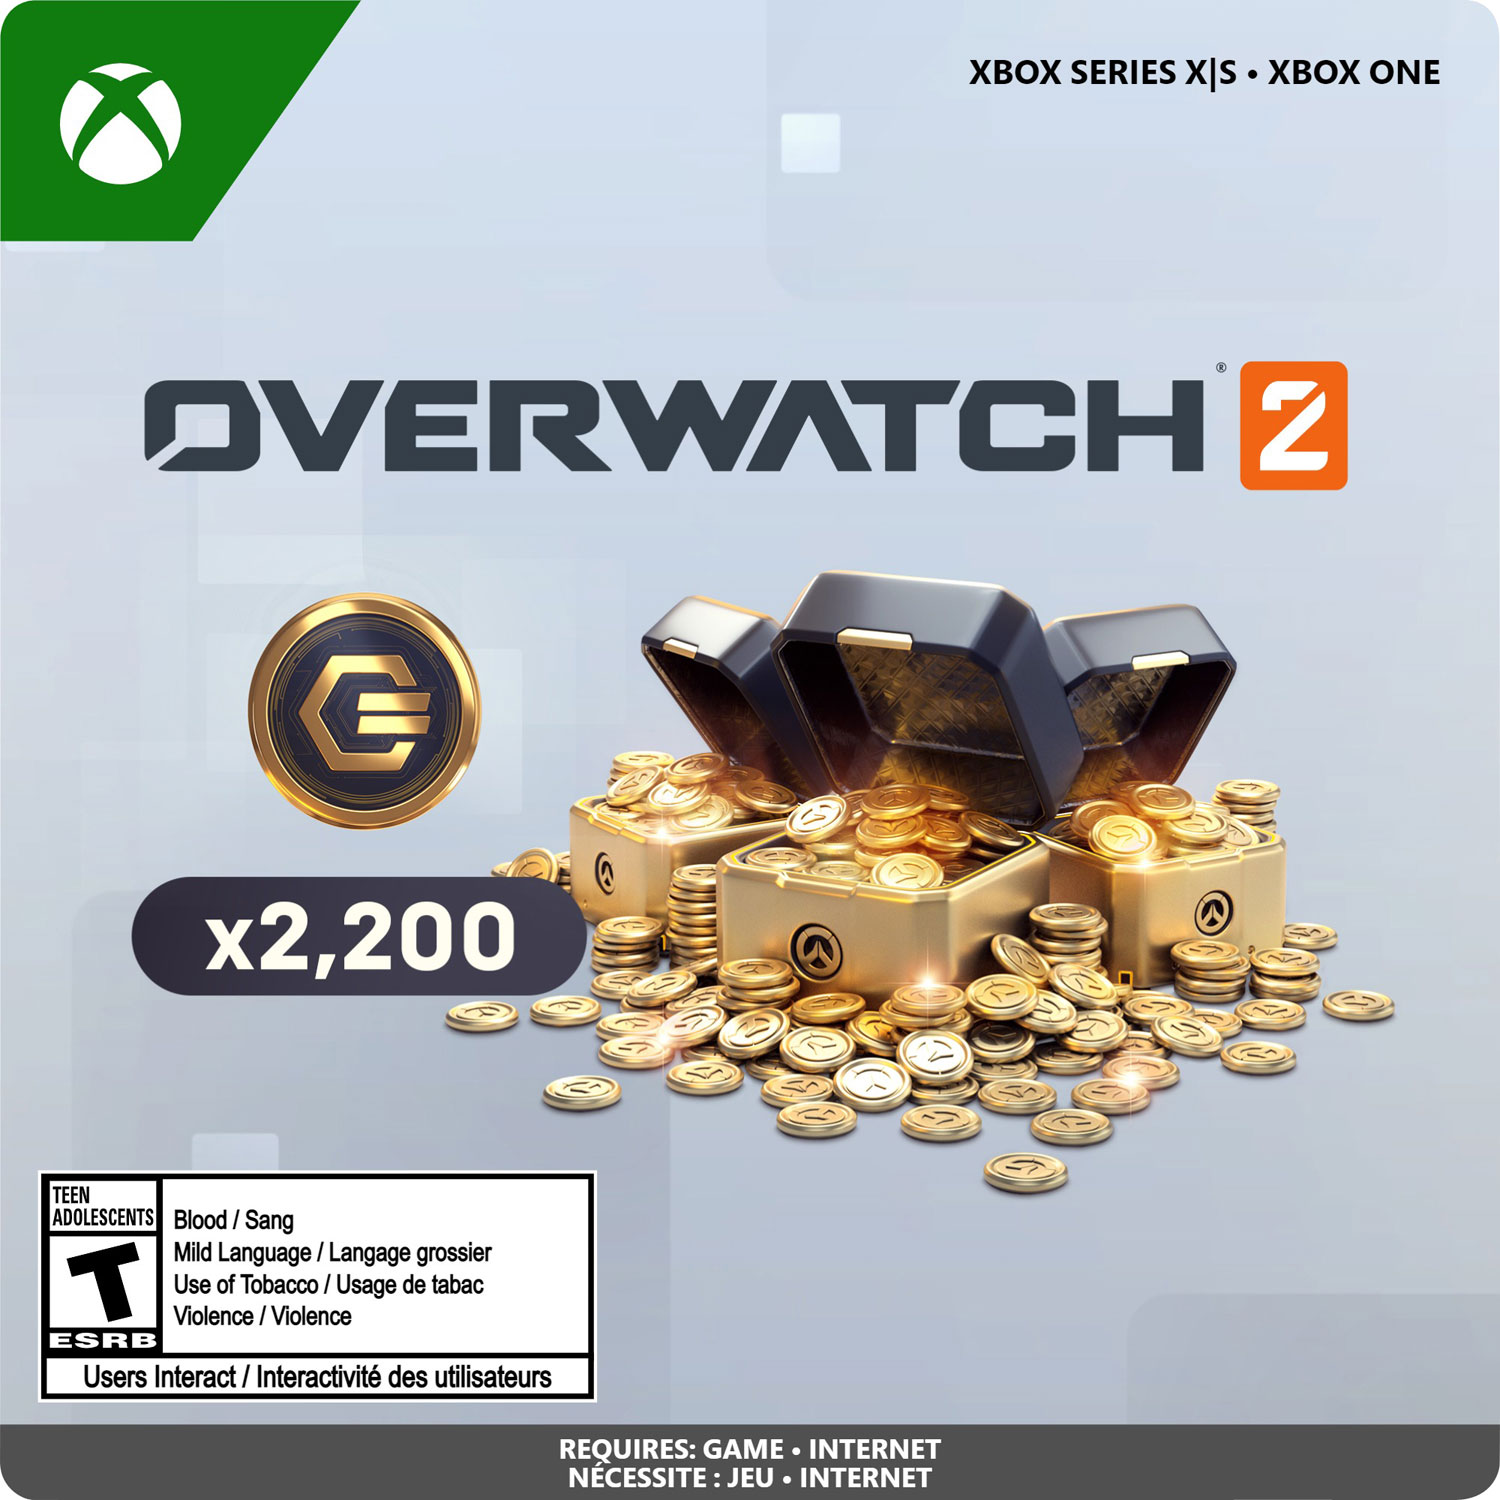 Overwatch 2 - 2,000 Coins (Xbox Series X|S / Xbox One) - Digital Download